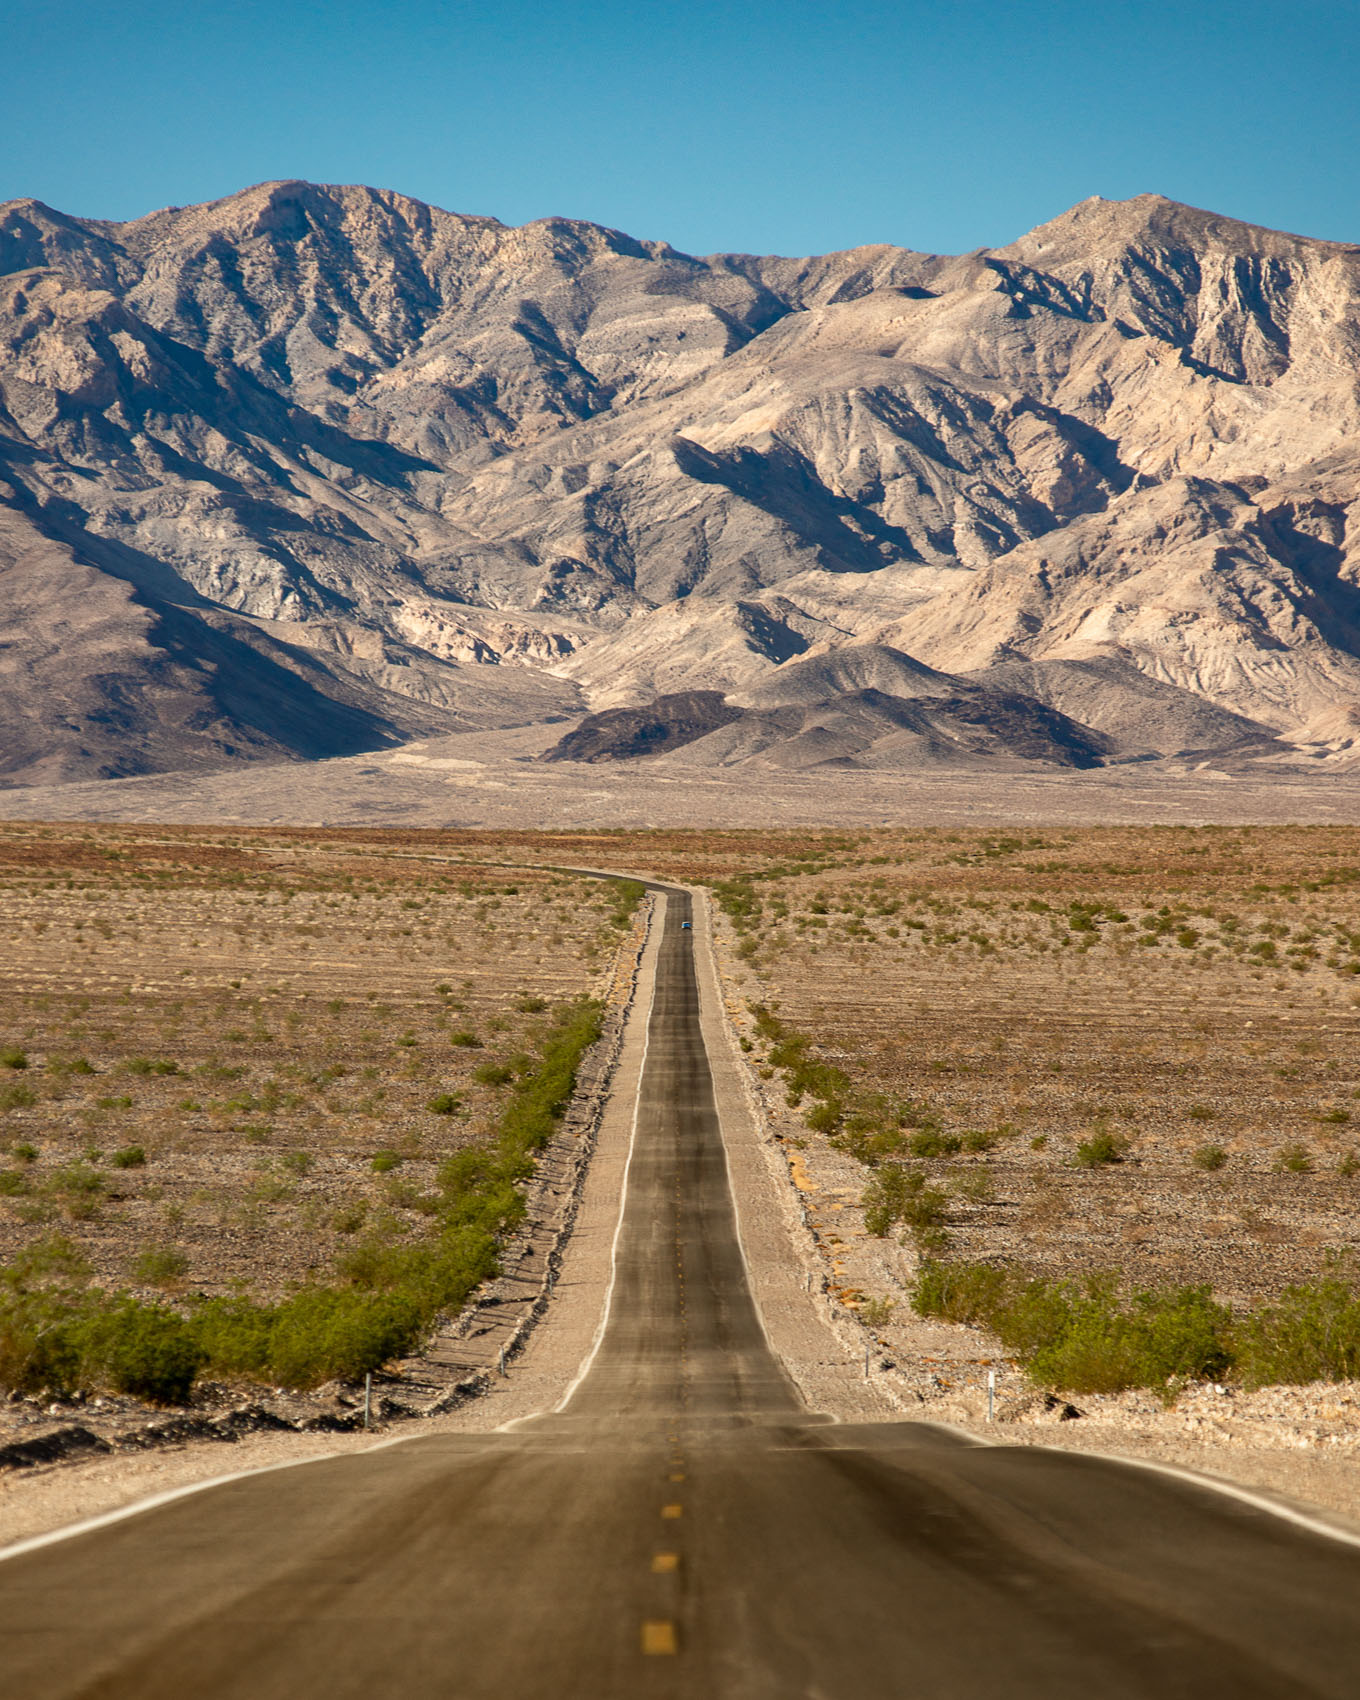 An empty desert road leading to mountains in Death Valley National Park.